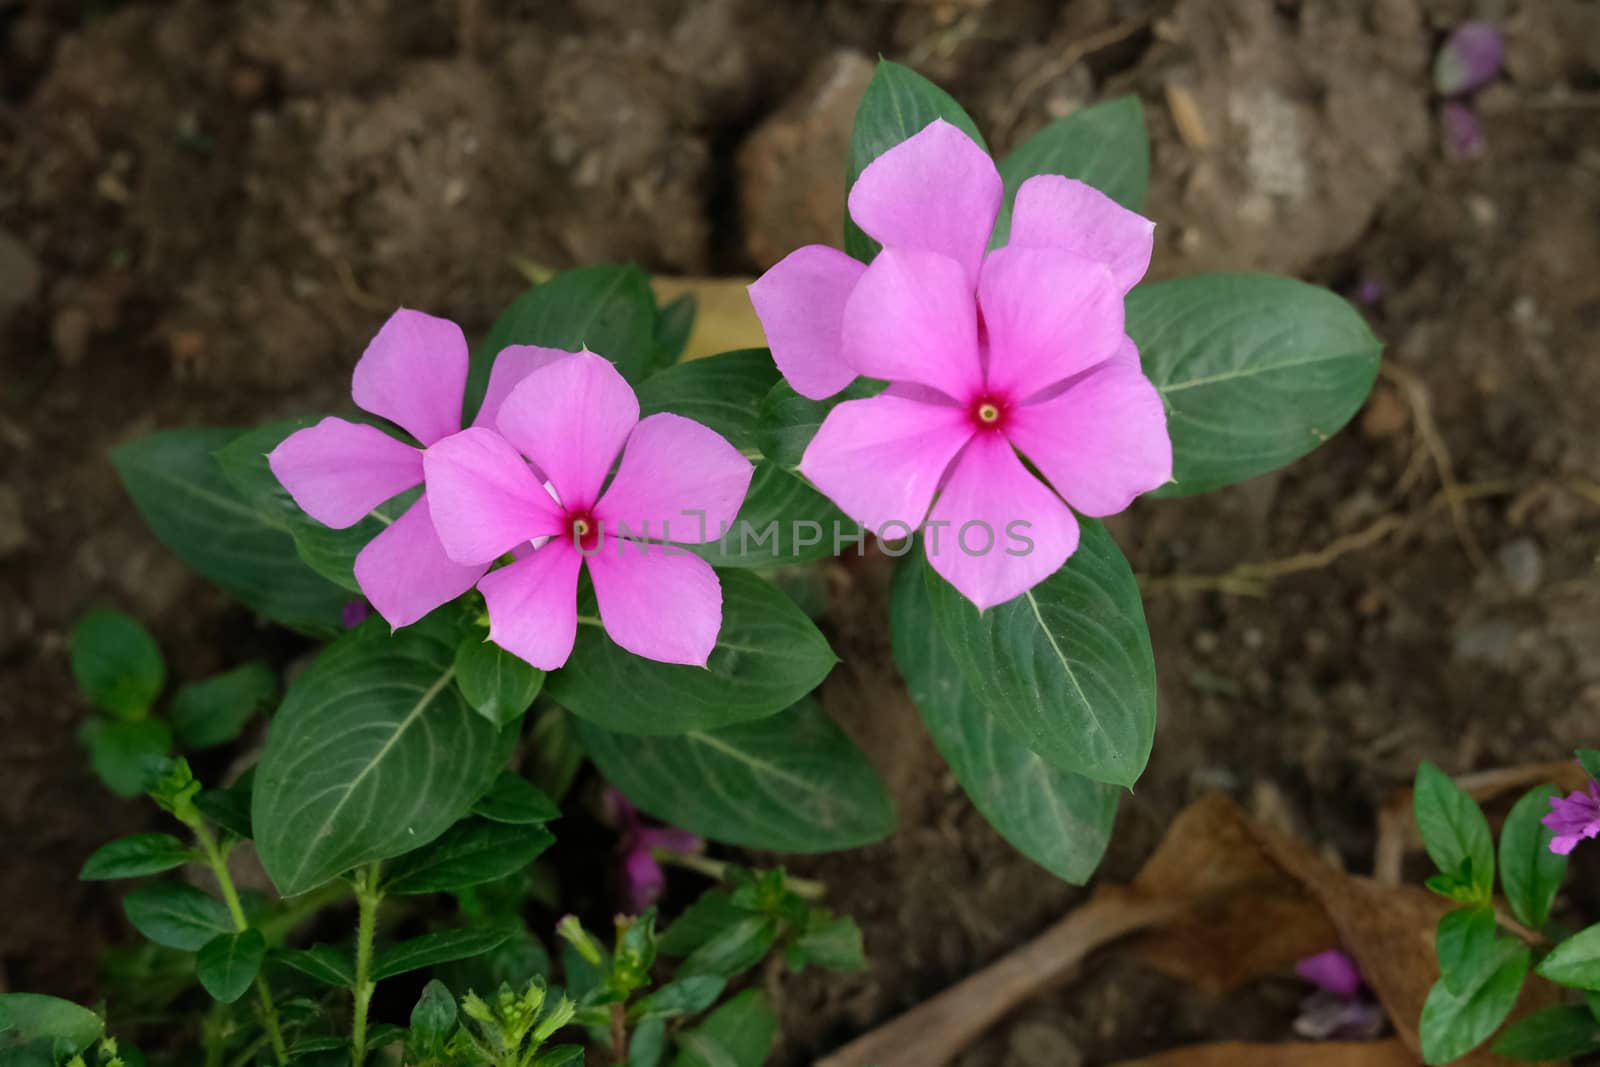 bunch of pink catharanthus roseus flower - cape periwinkle. Image photo